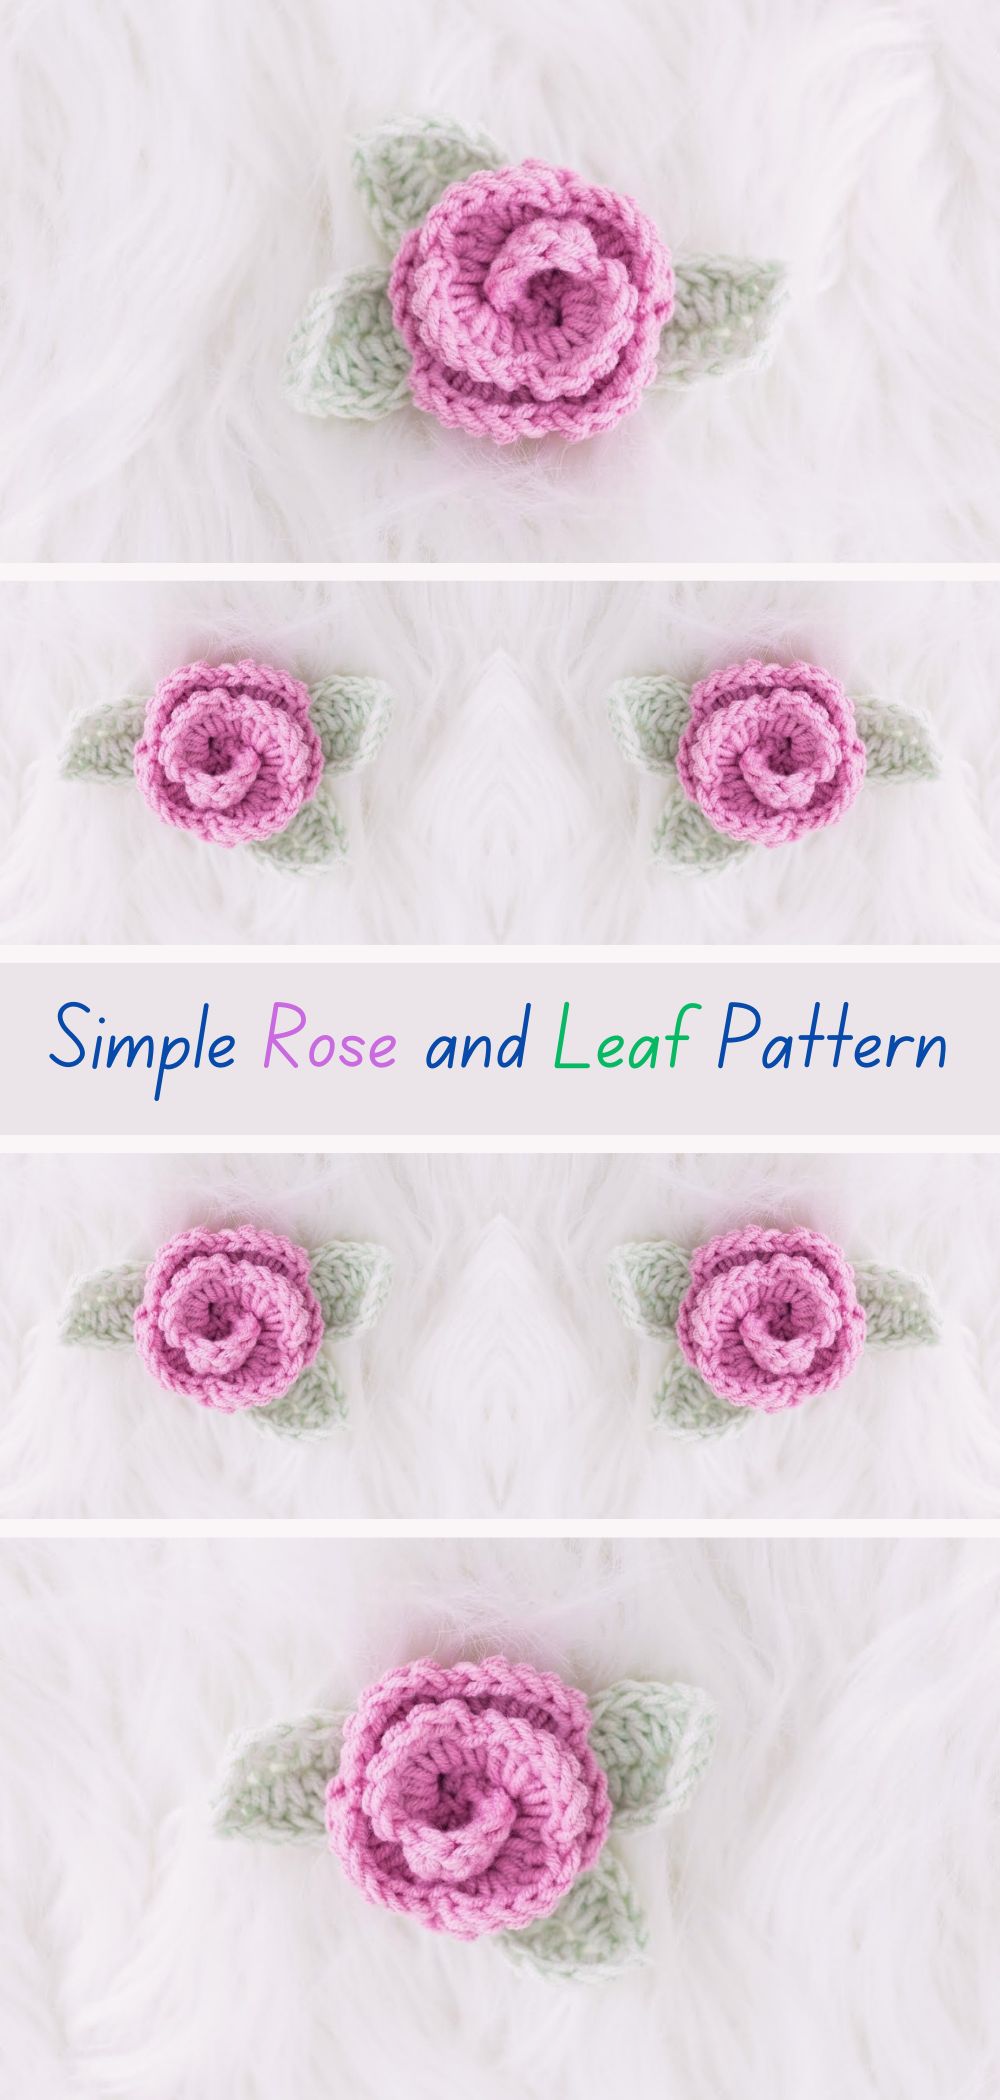 Simple Rose and Leaf Crochet Pattern - Create beautiful roses and leaves with this easy-to-follow crochet pattern